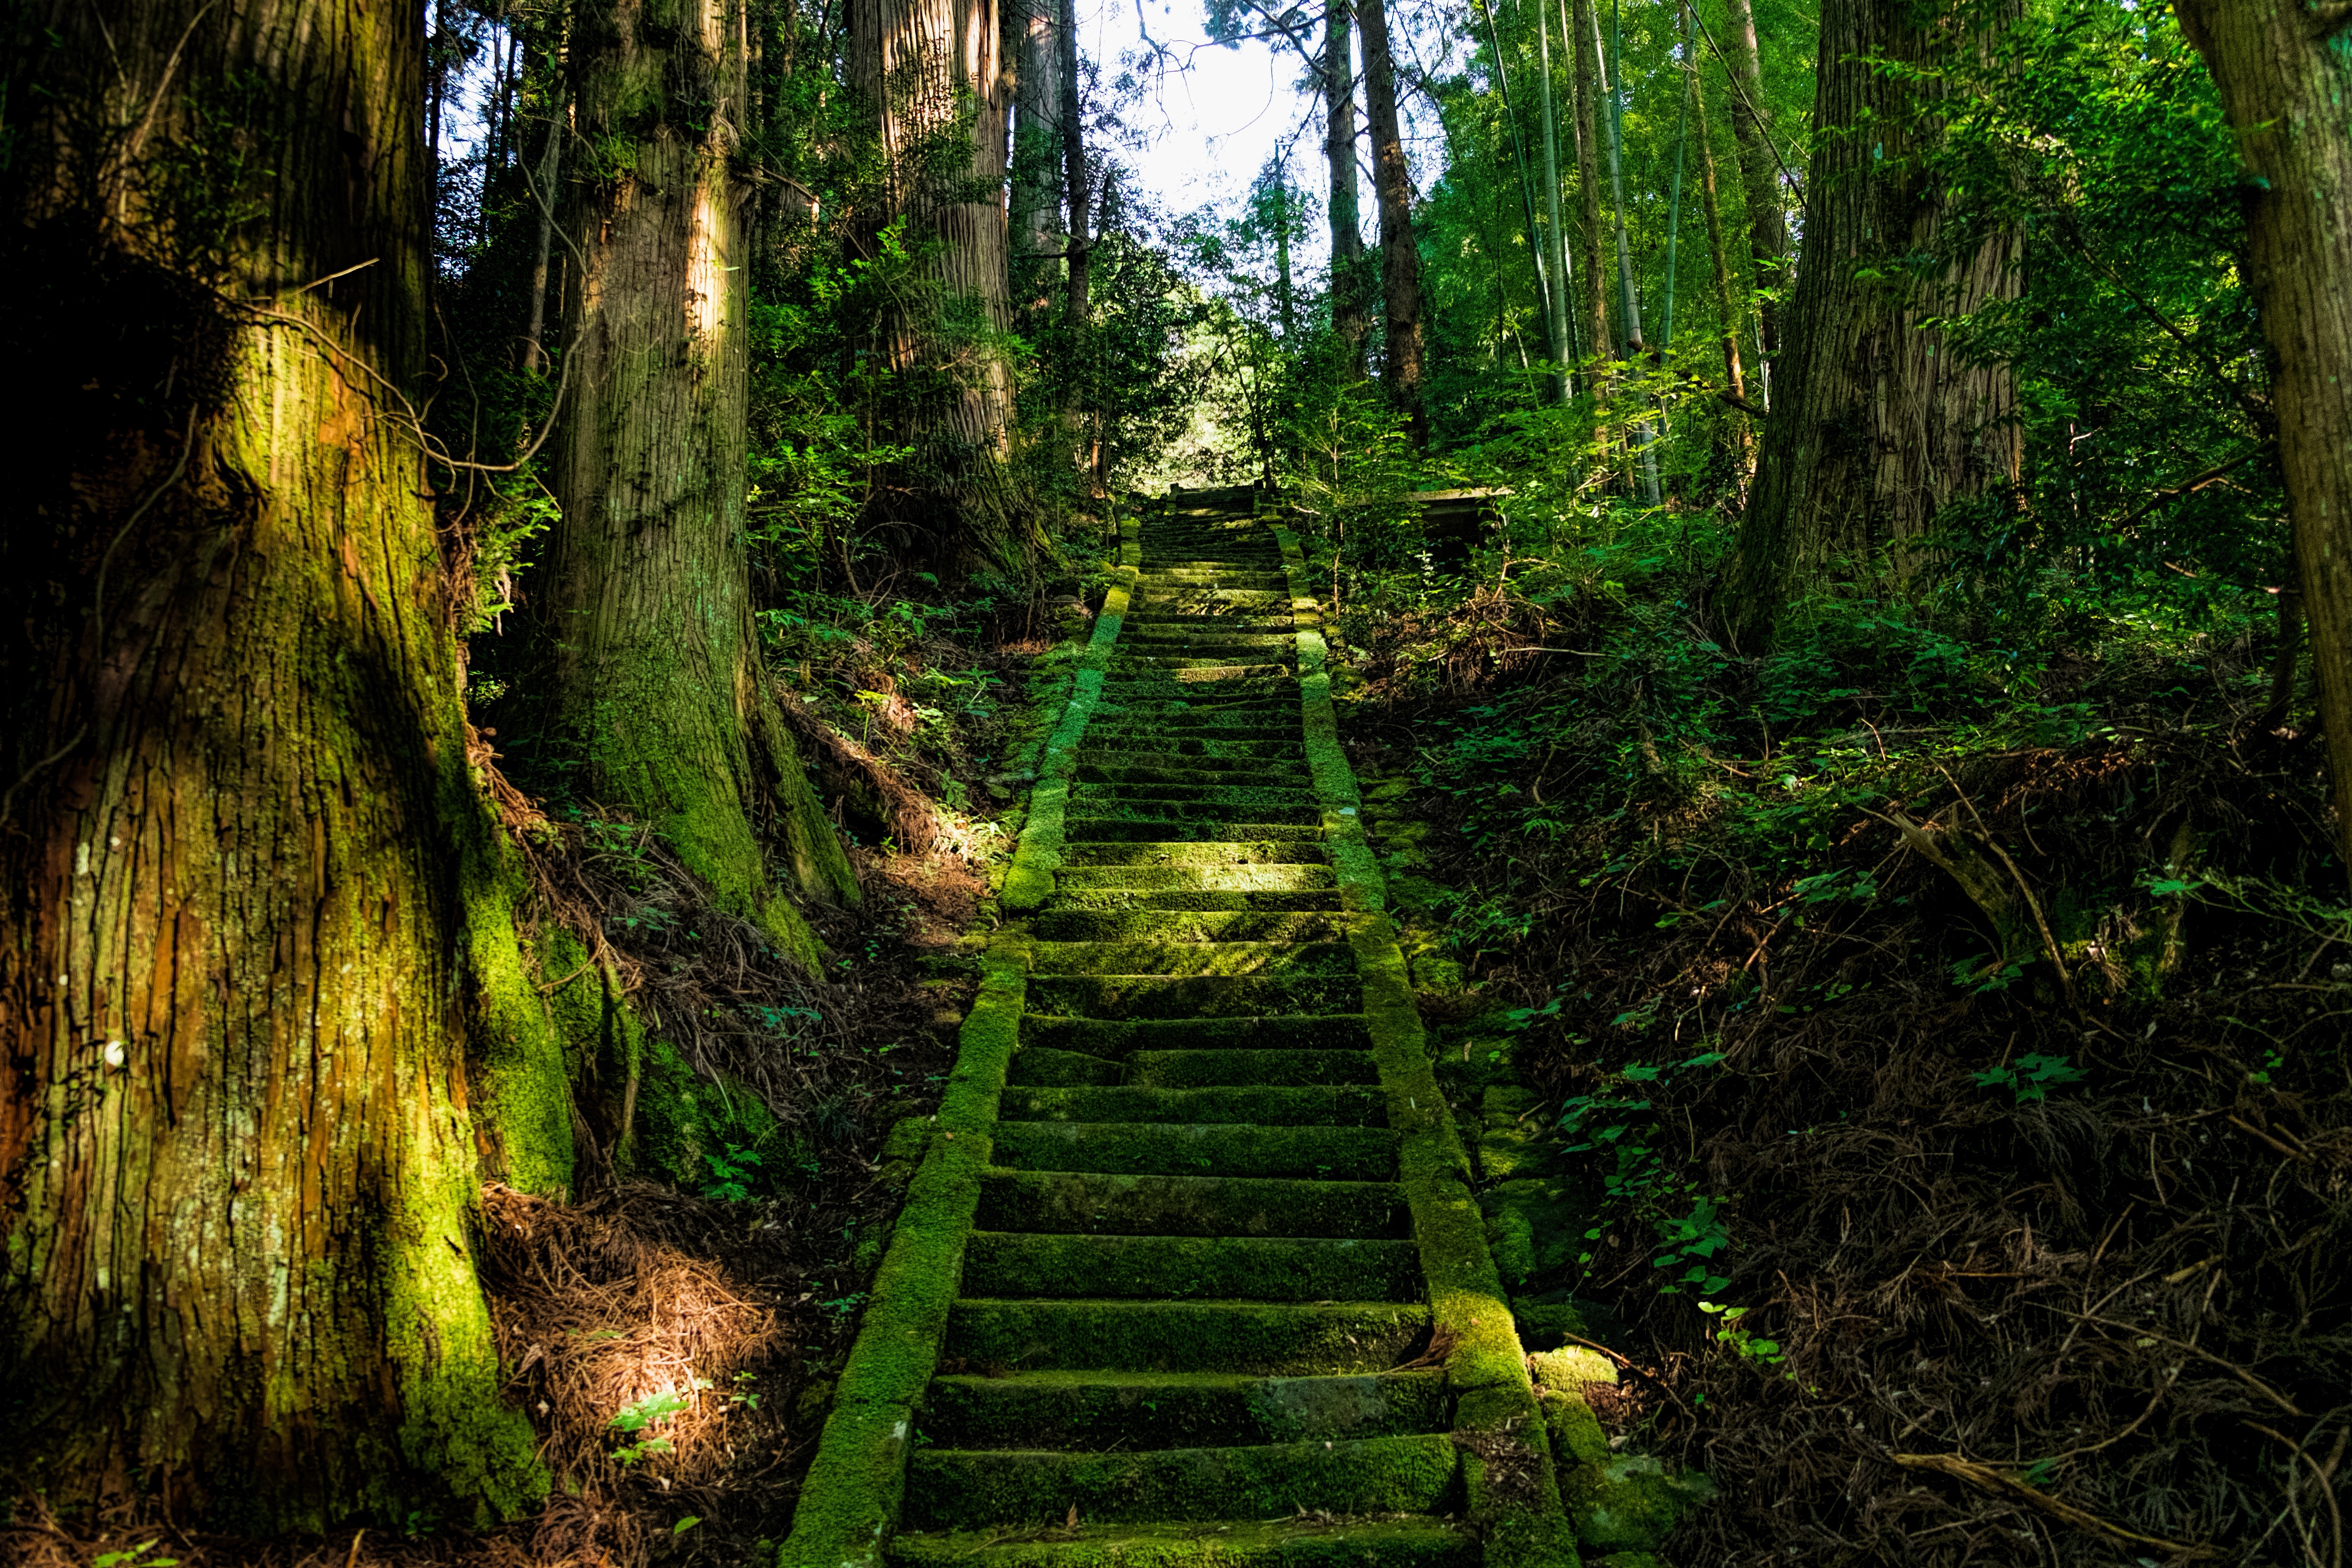 Wallpaper for mobile devices stairs, nature, trees, moss